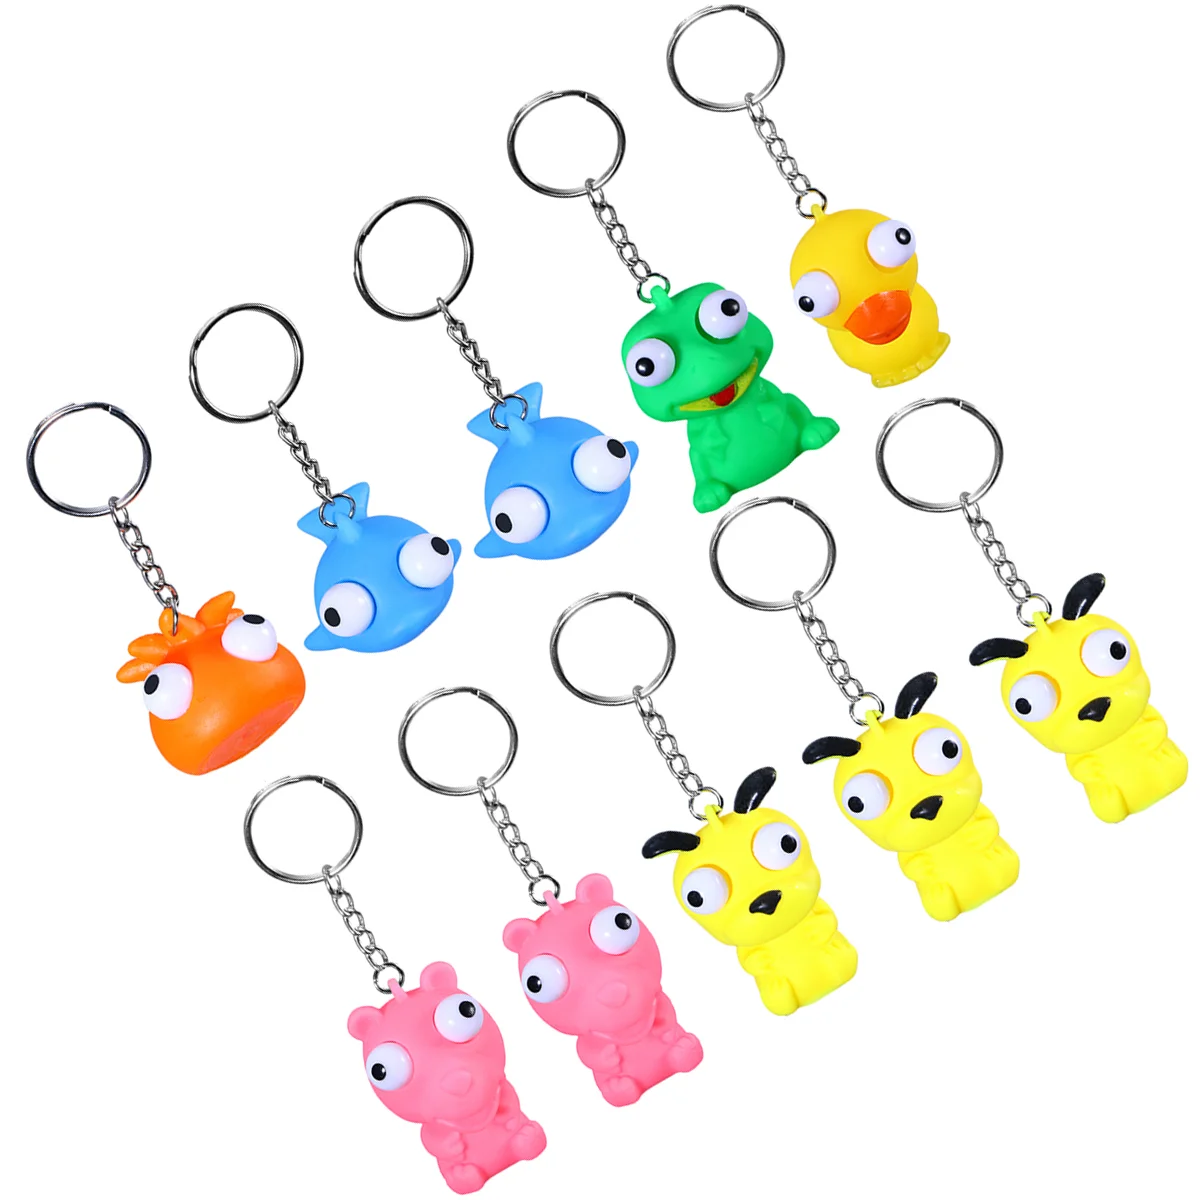 

10pc Popping Eyes Keychain Squeezing Toys Fun Squeeze Toys for Kids Party Favor Goodie Bag Fillers Stray